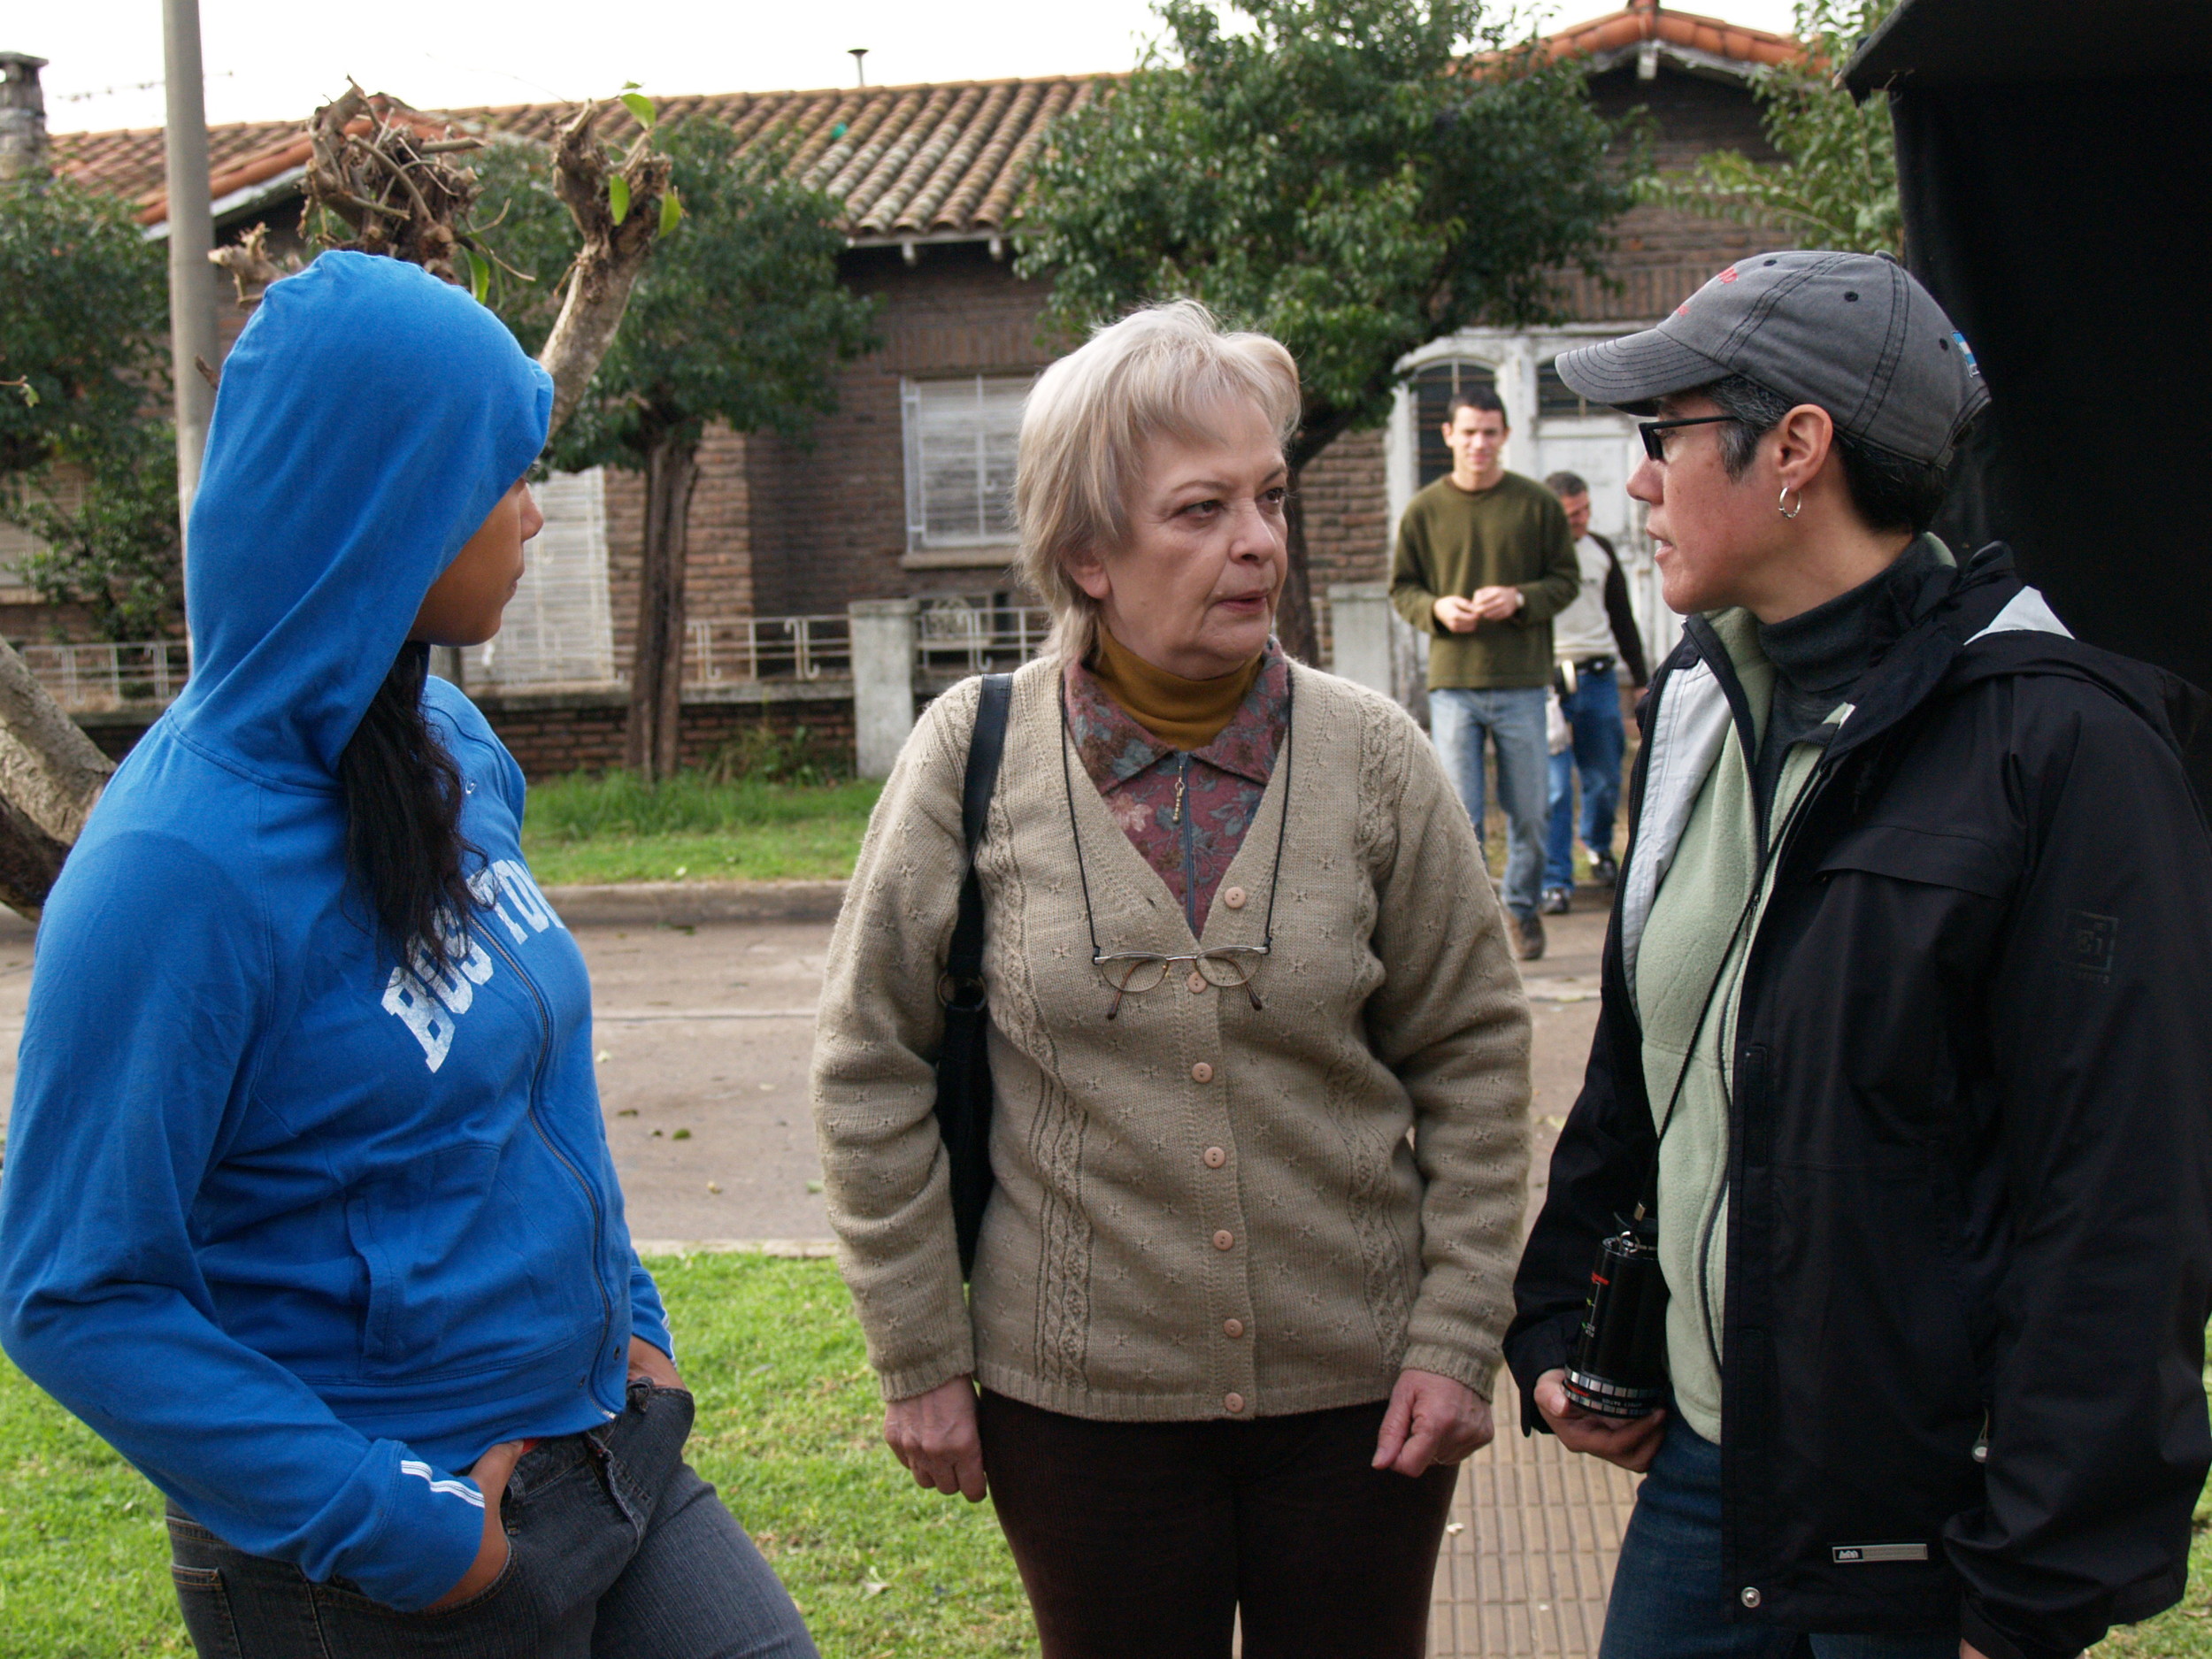  Cristina with Ana Maria Colombo and Kristen Gonzalez on set of  3 Américas  in Buenos Aires. 